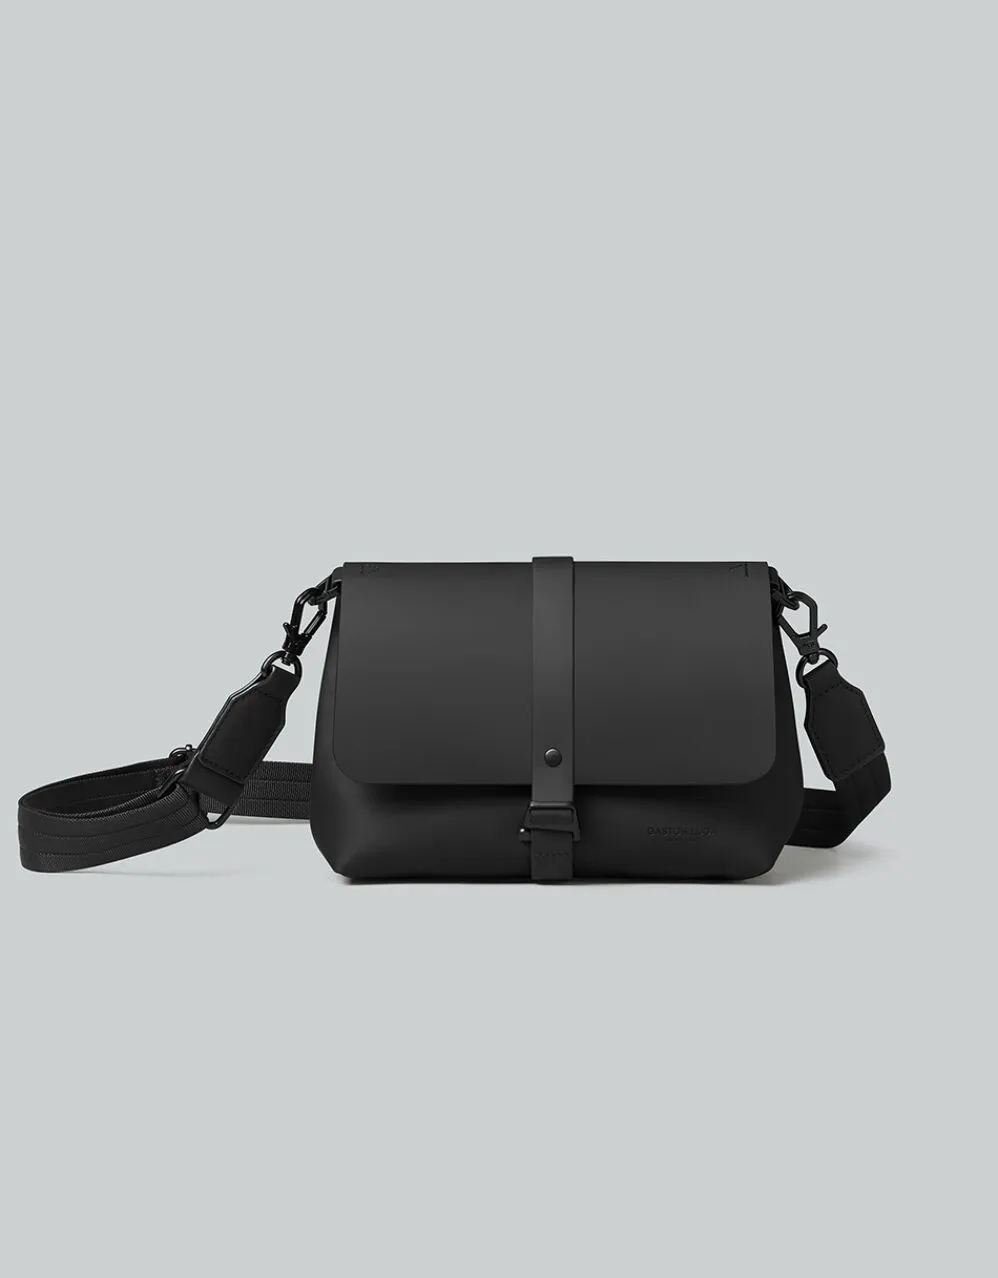 How to Buy Your Anvanda Backpack?